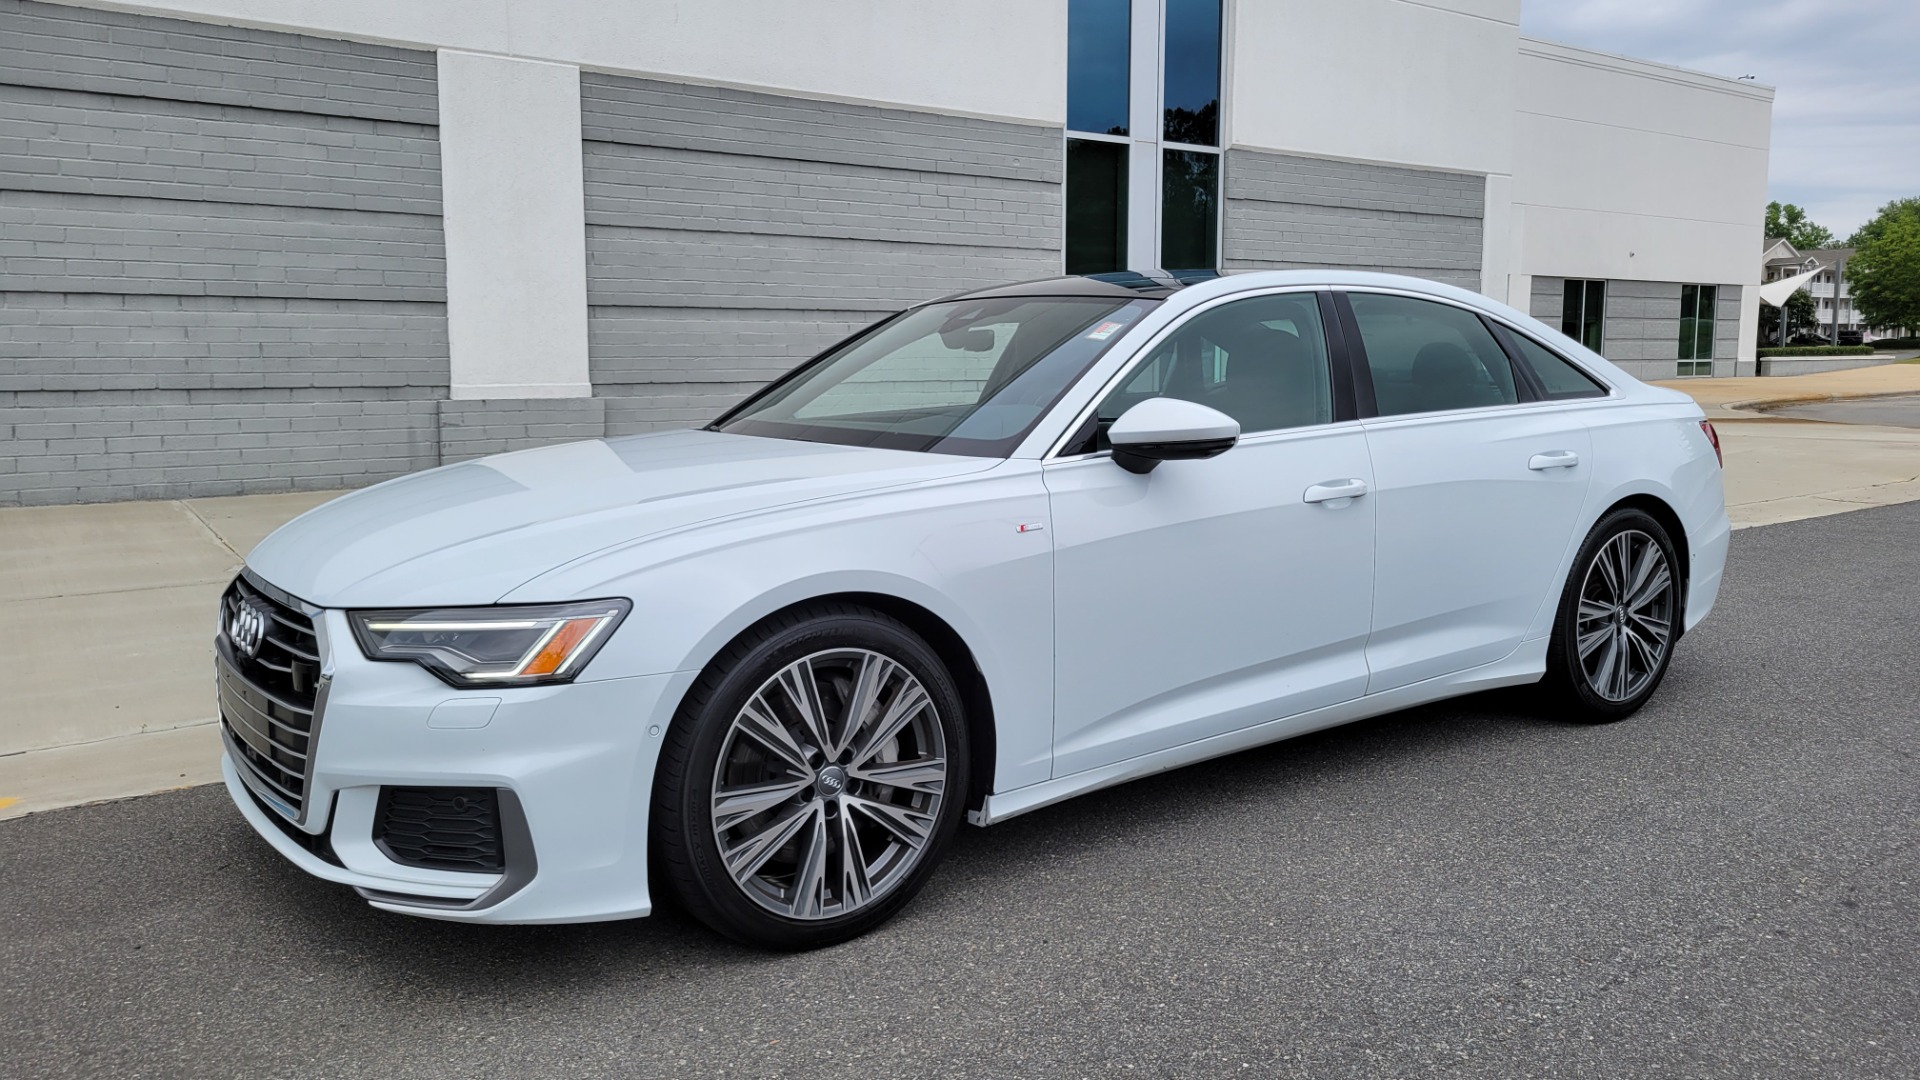 Used 2019 Audi A6 PREMIUM PLUS / DRVR ASST / WARM WTHR / CLD WTHR / NAV / CAMERA for sale $47,995 at Formula Imports in Charlotte NC 28227 3